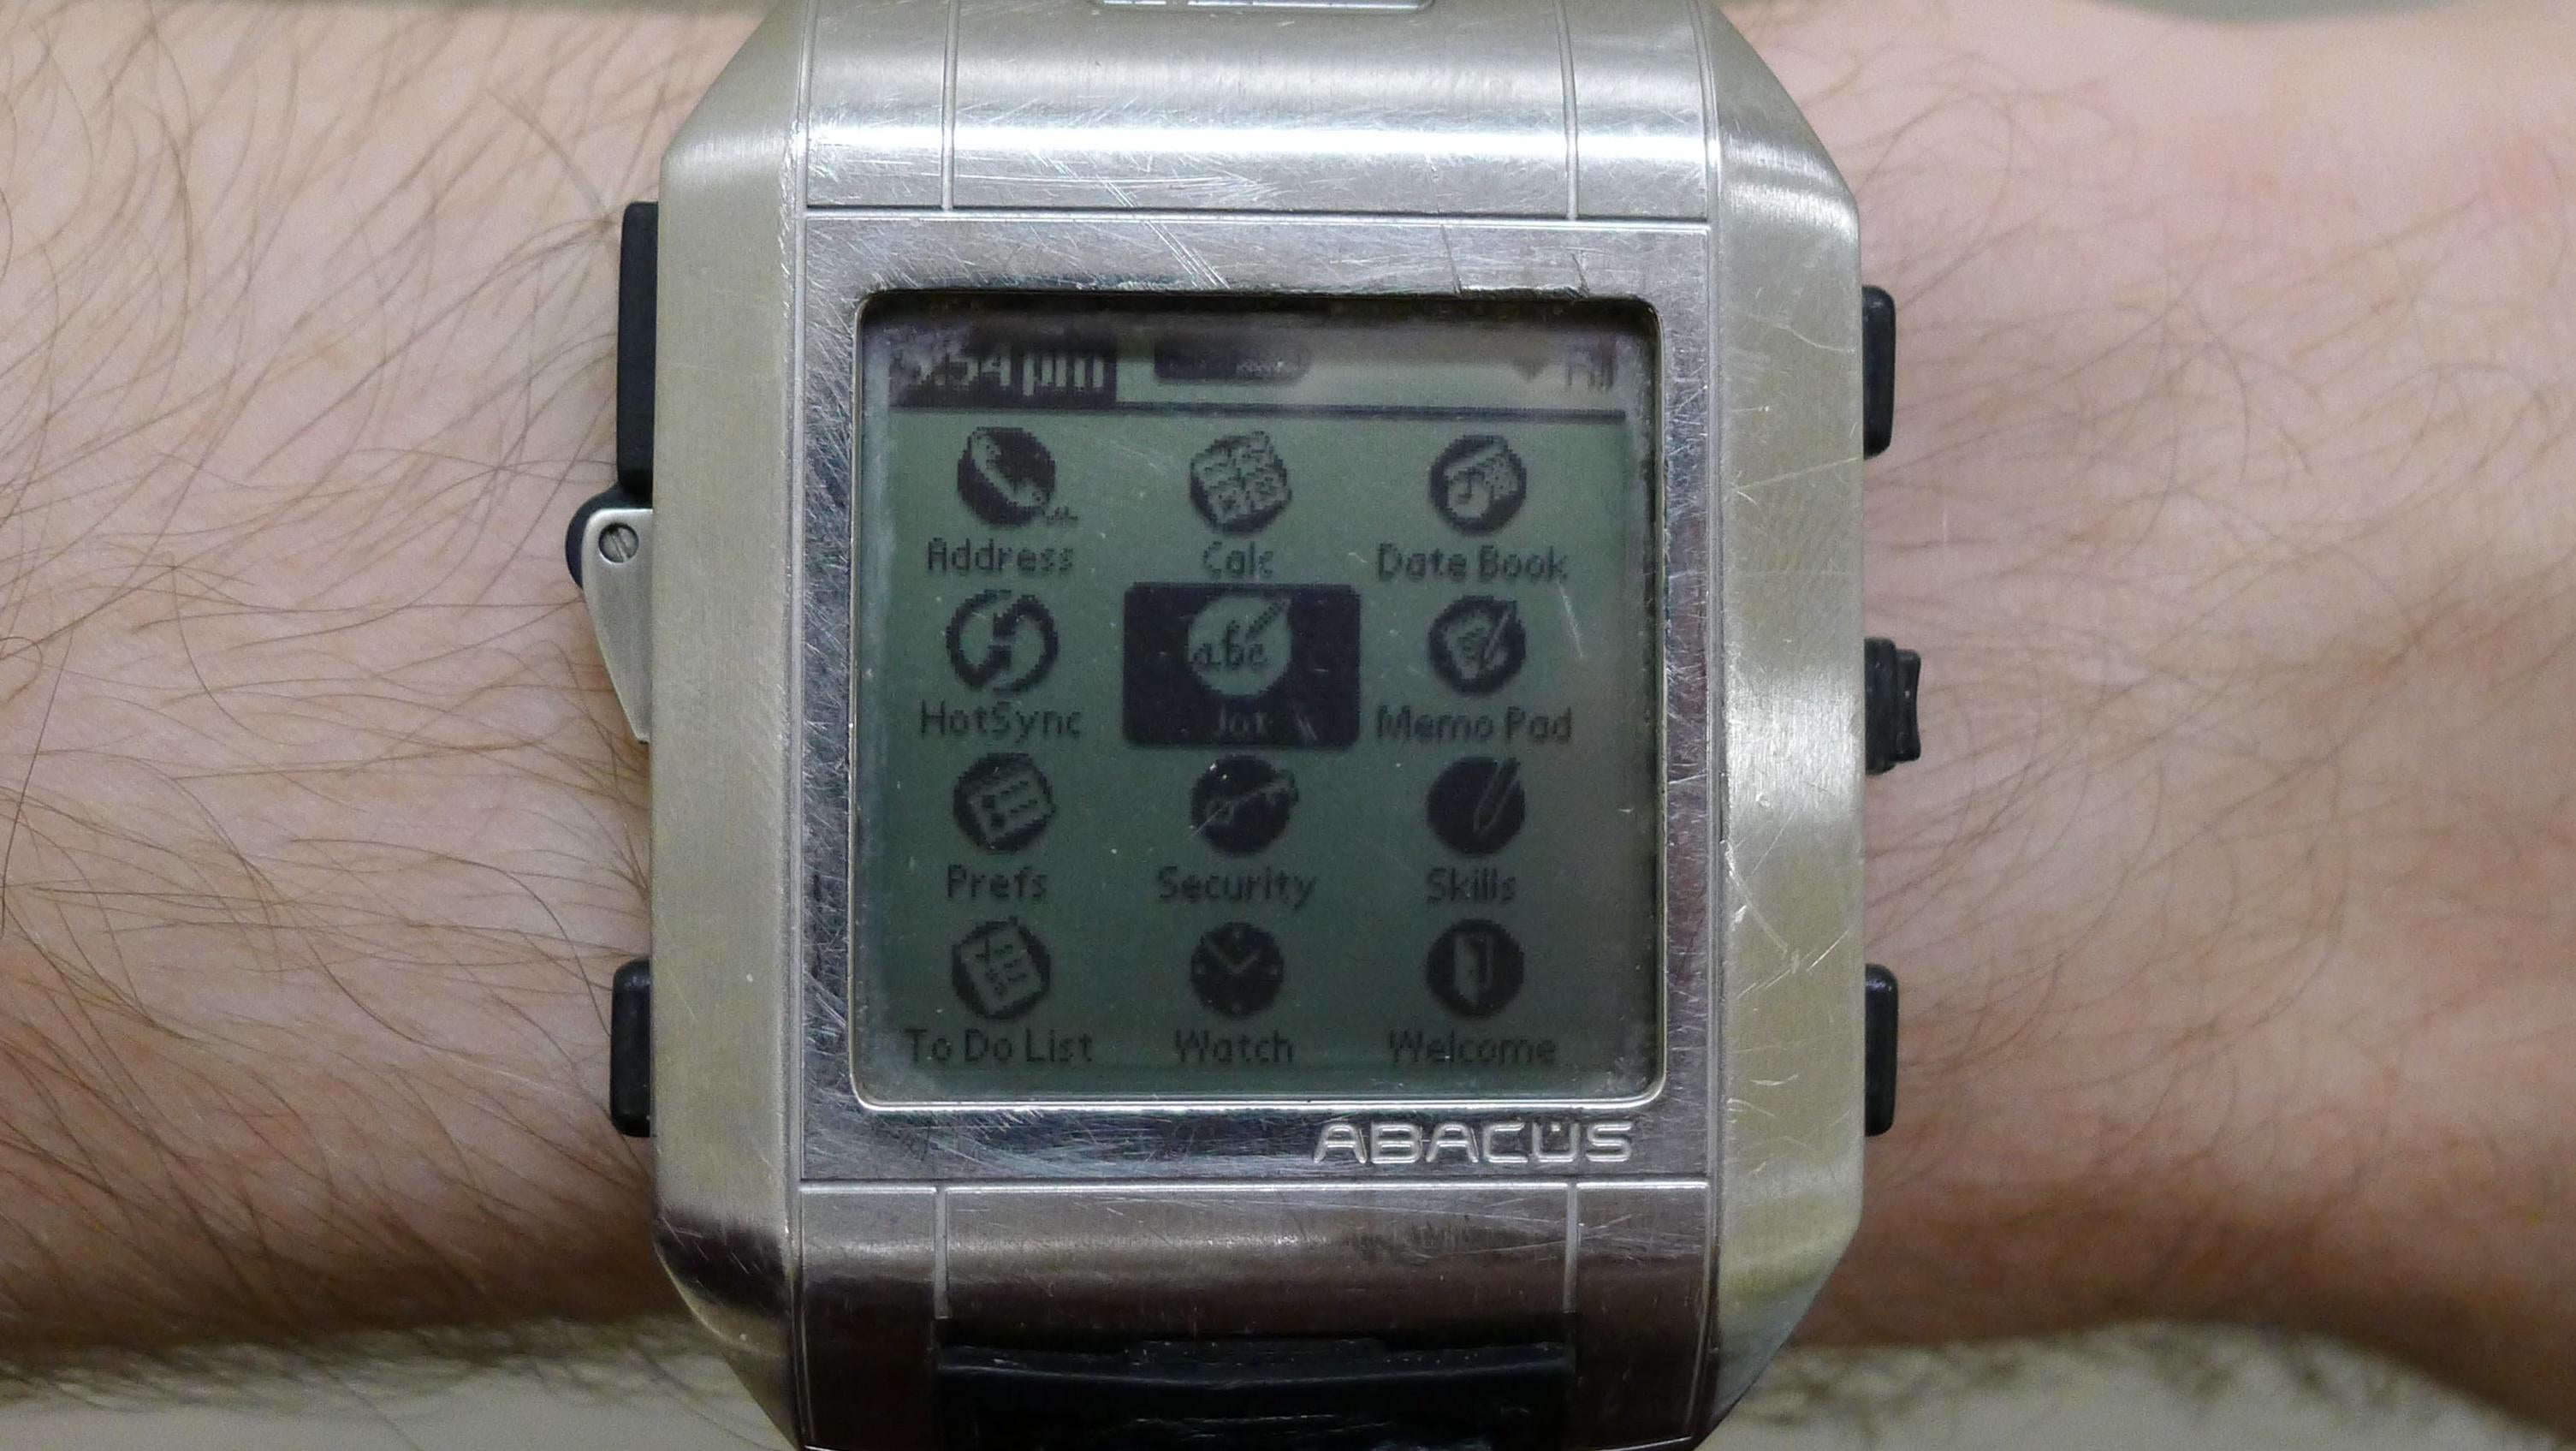 Pictured is a later version of the Fossil Wrist PDA (Photo: Danski14/Wikimedia, Fair Use)